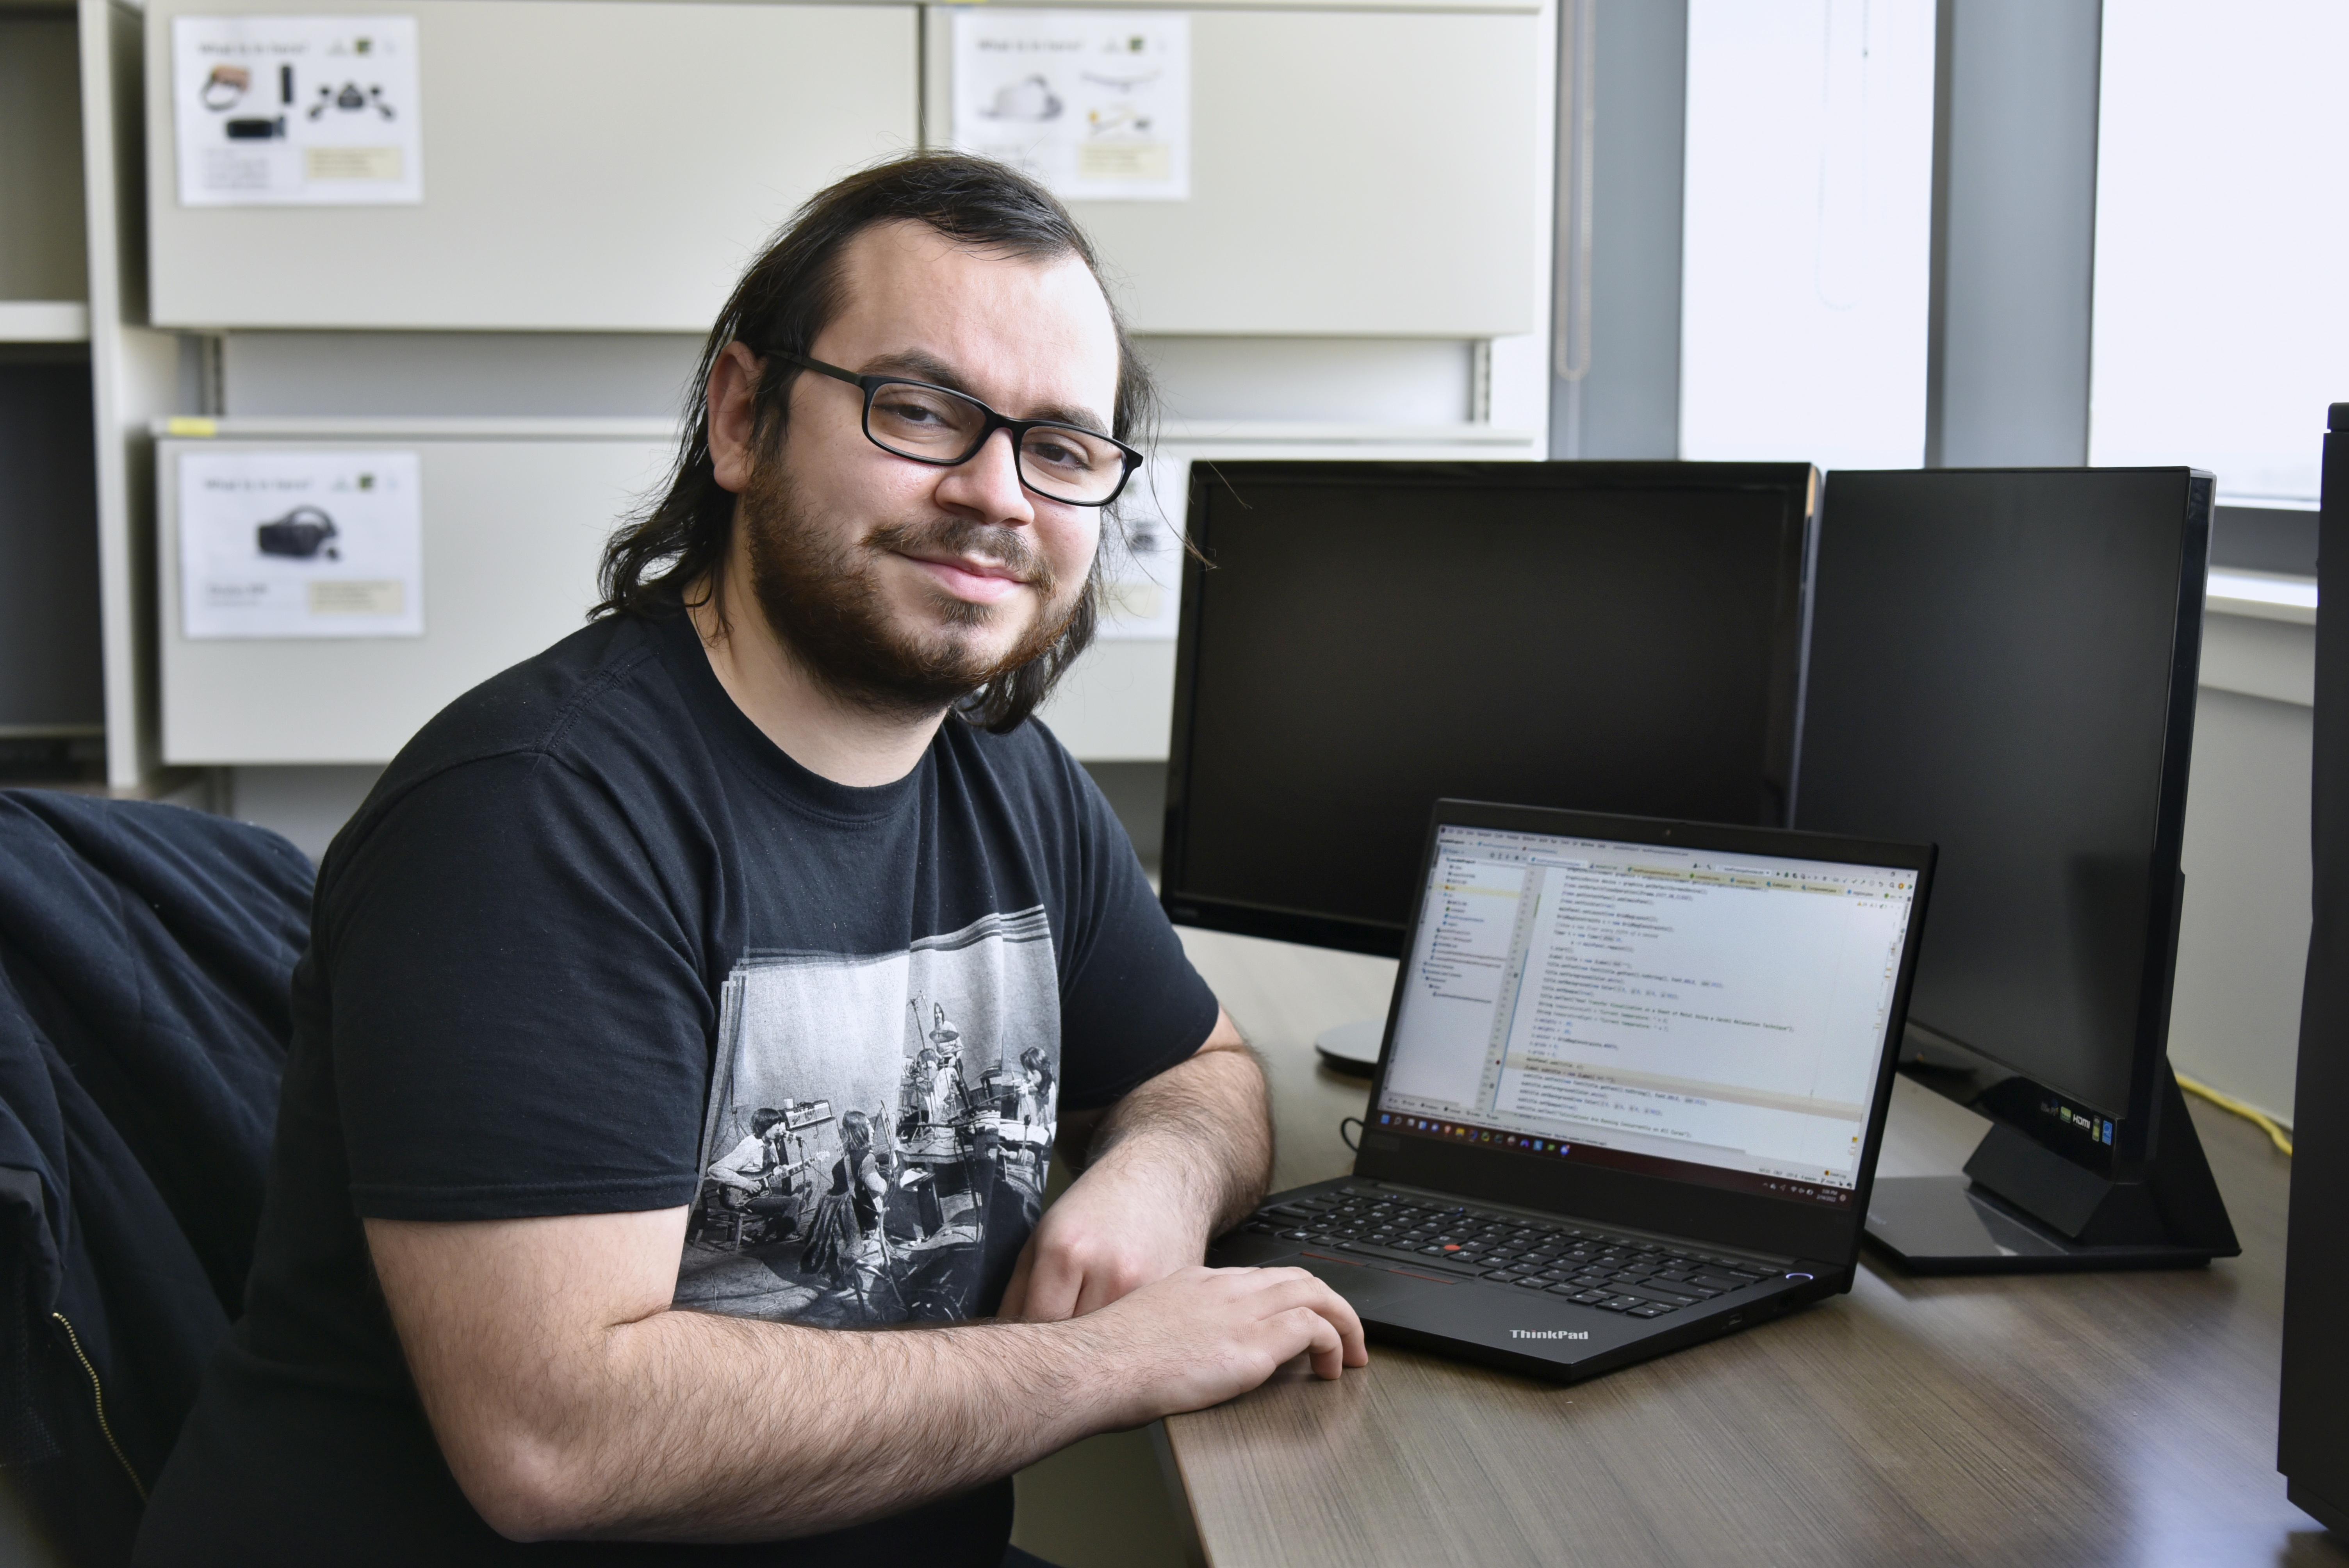 Computer science major Dominic Altamura sits in front of a computer, wearing a black t-shirt and black glasses. He has mid-length brown hair.